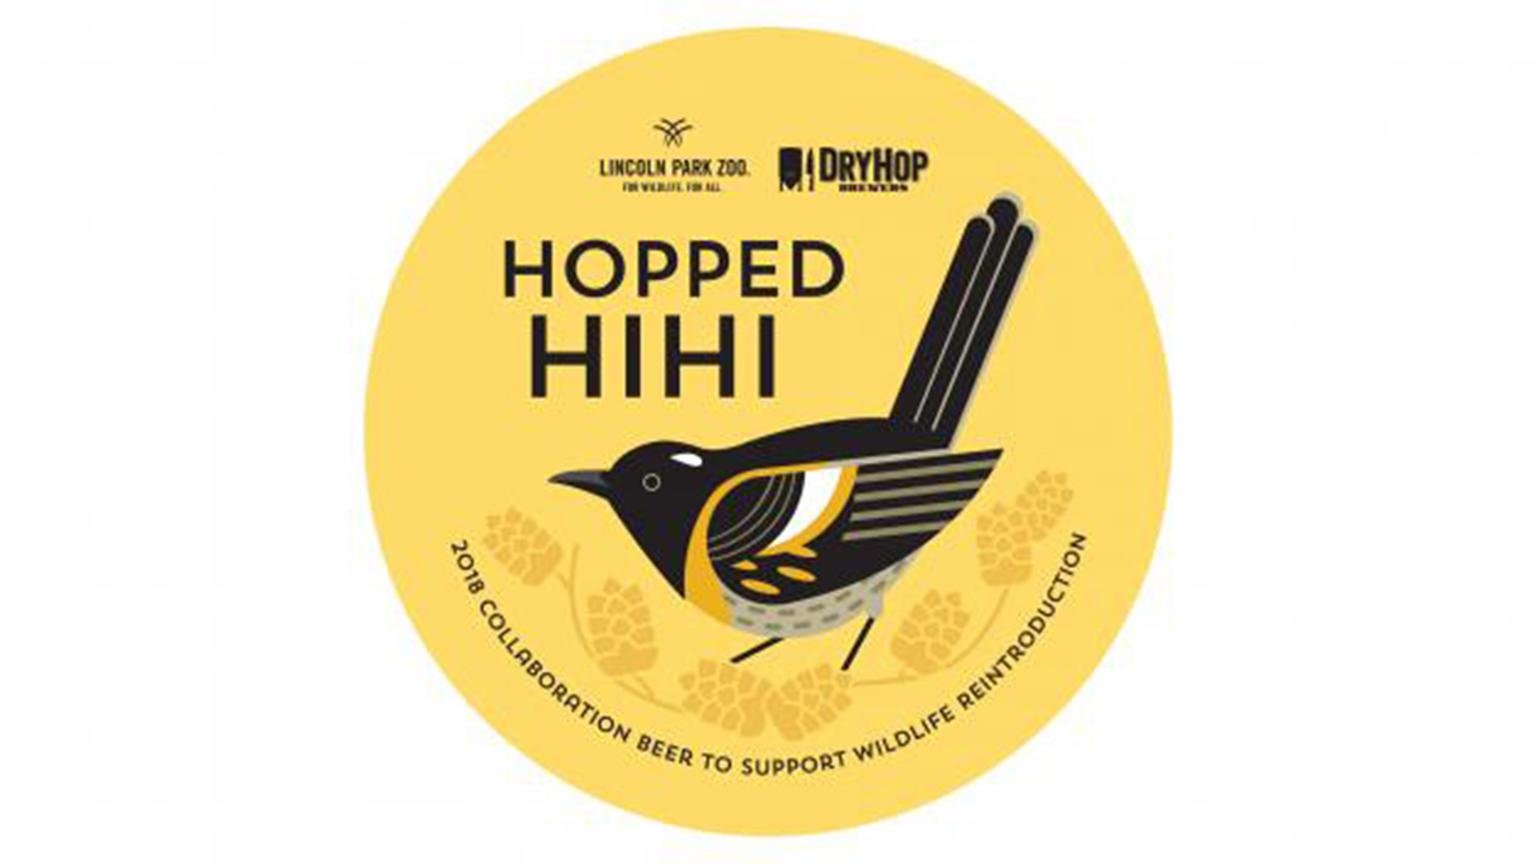 The coaster design for DryHop Brewers’ new “Hopped Hihi” IPA (DryHop Brewers / Lincoln Park Zoo)